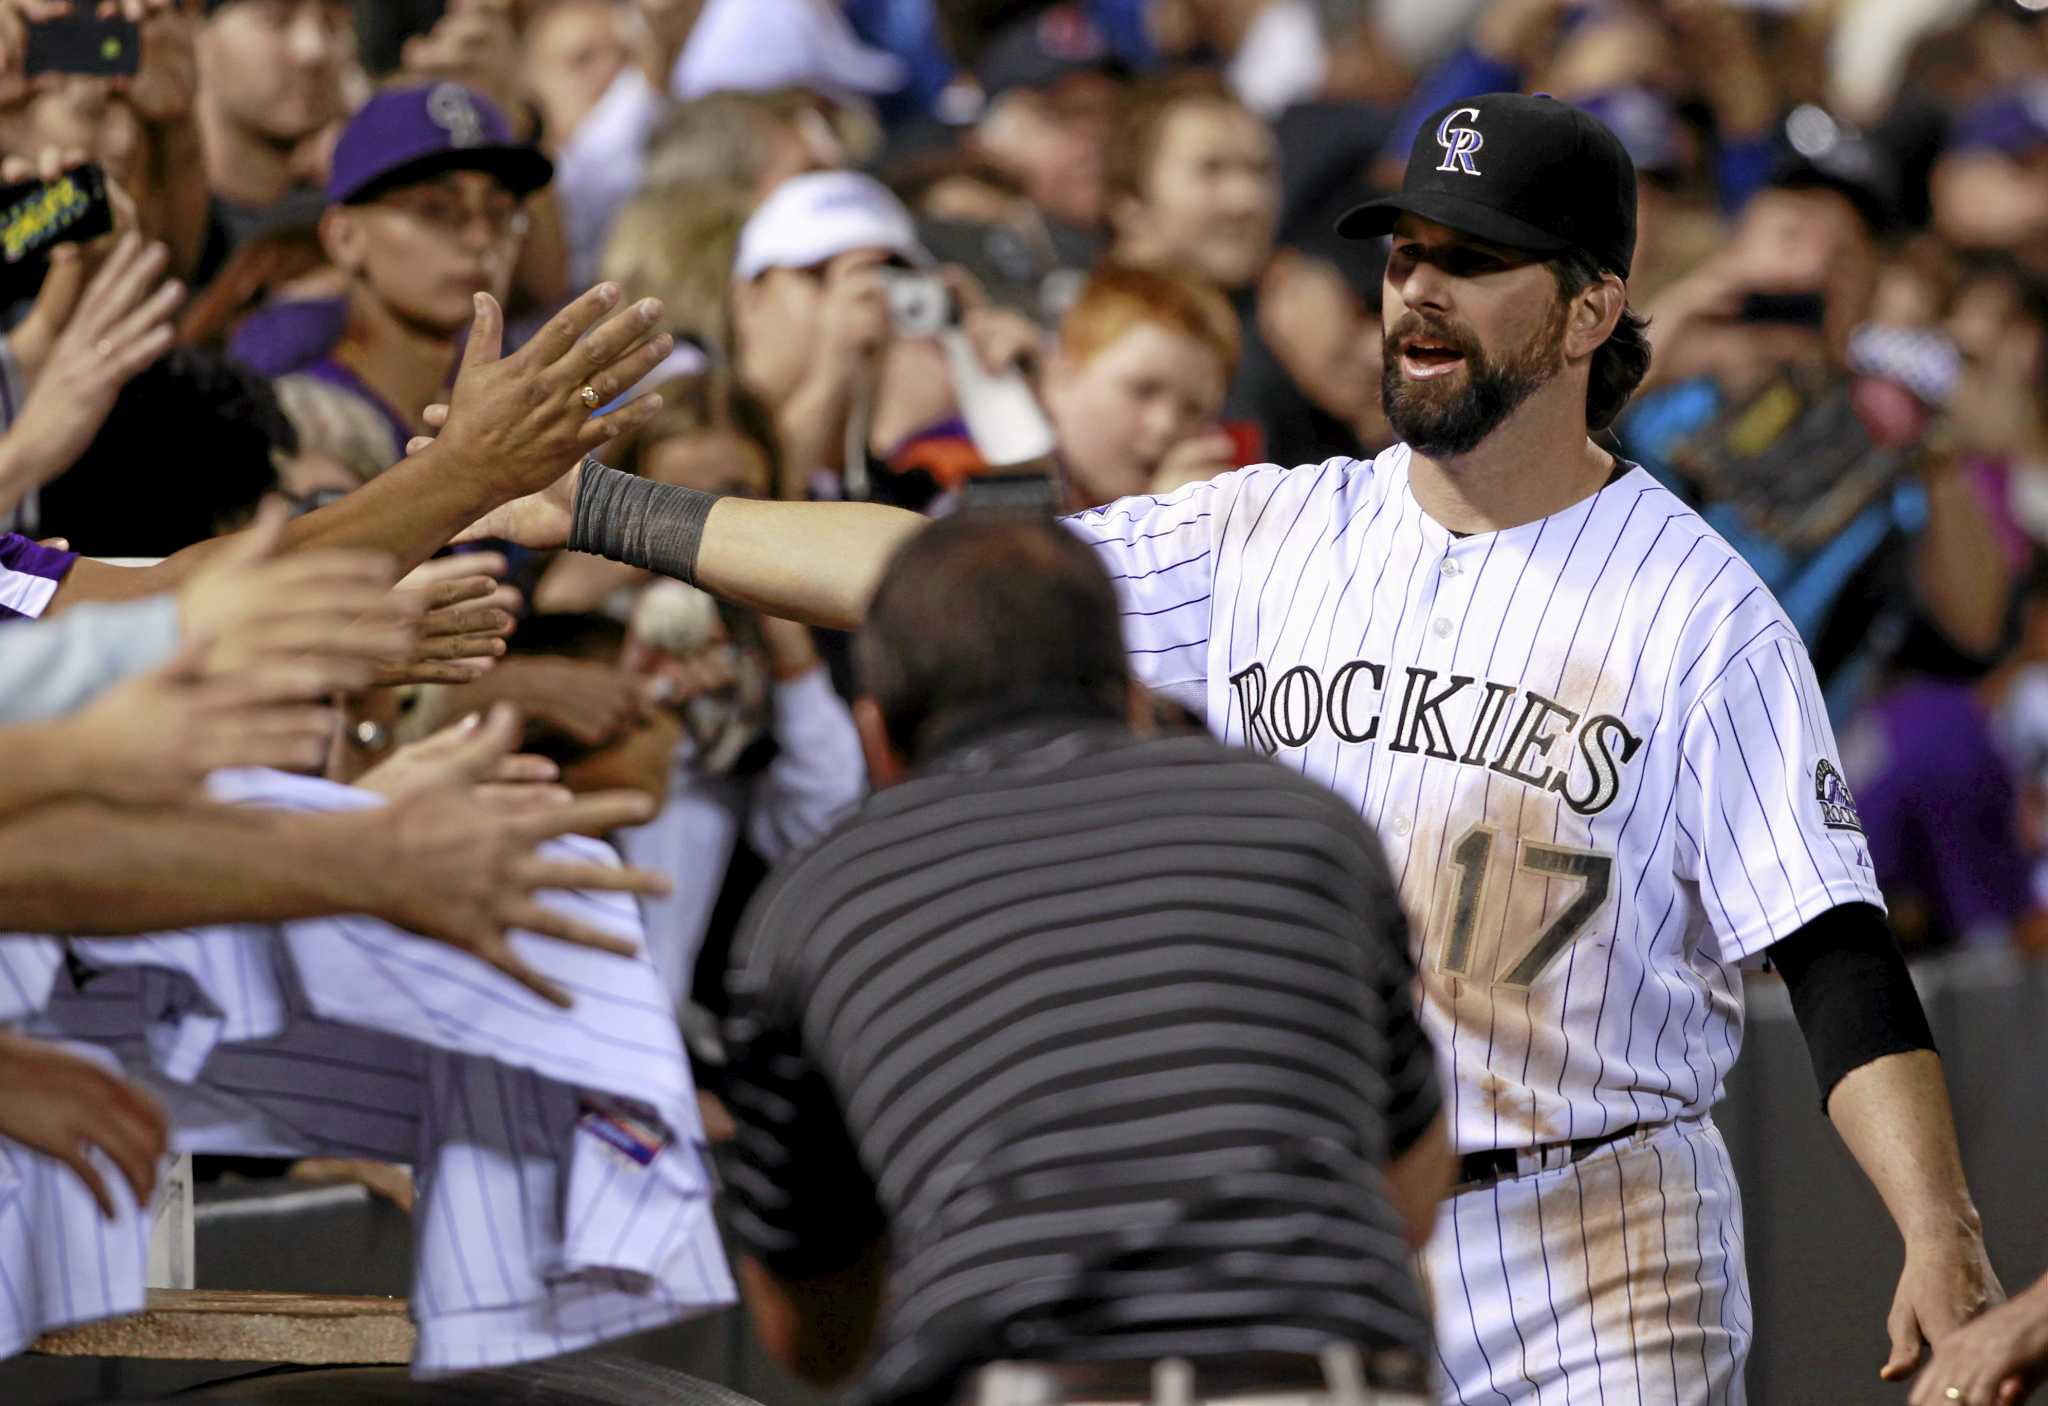 Todd Helton reflects on Rockies career in return to Coors Field